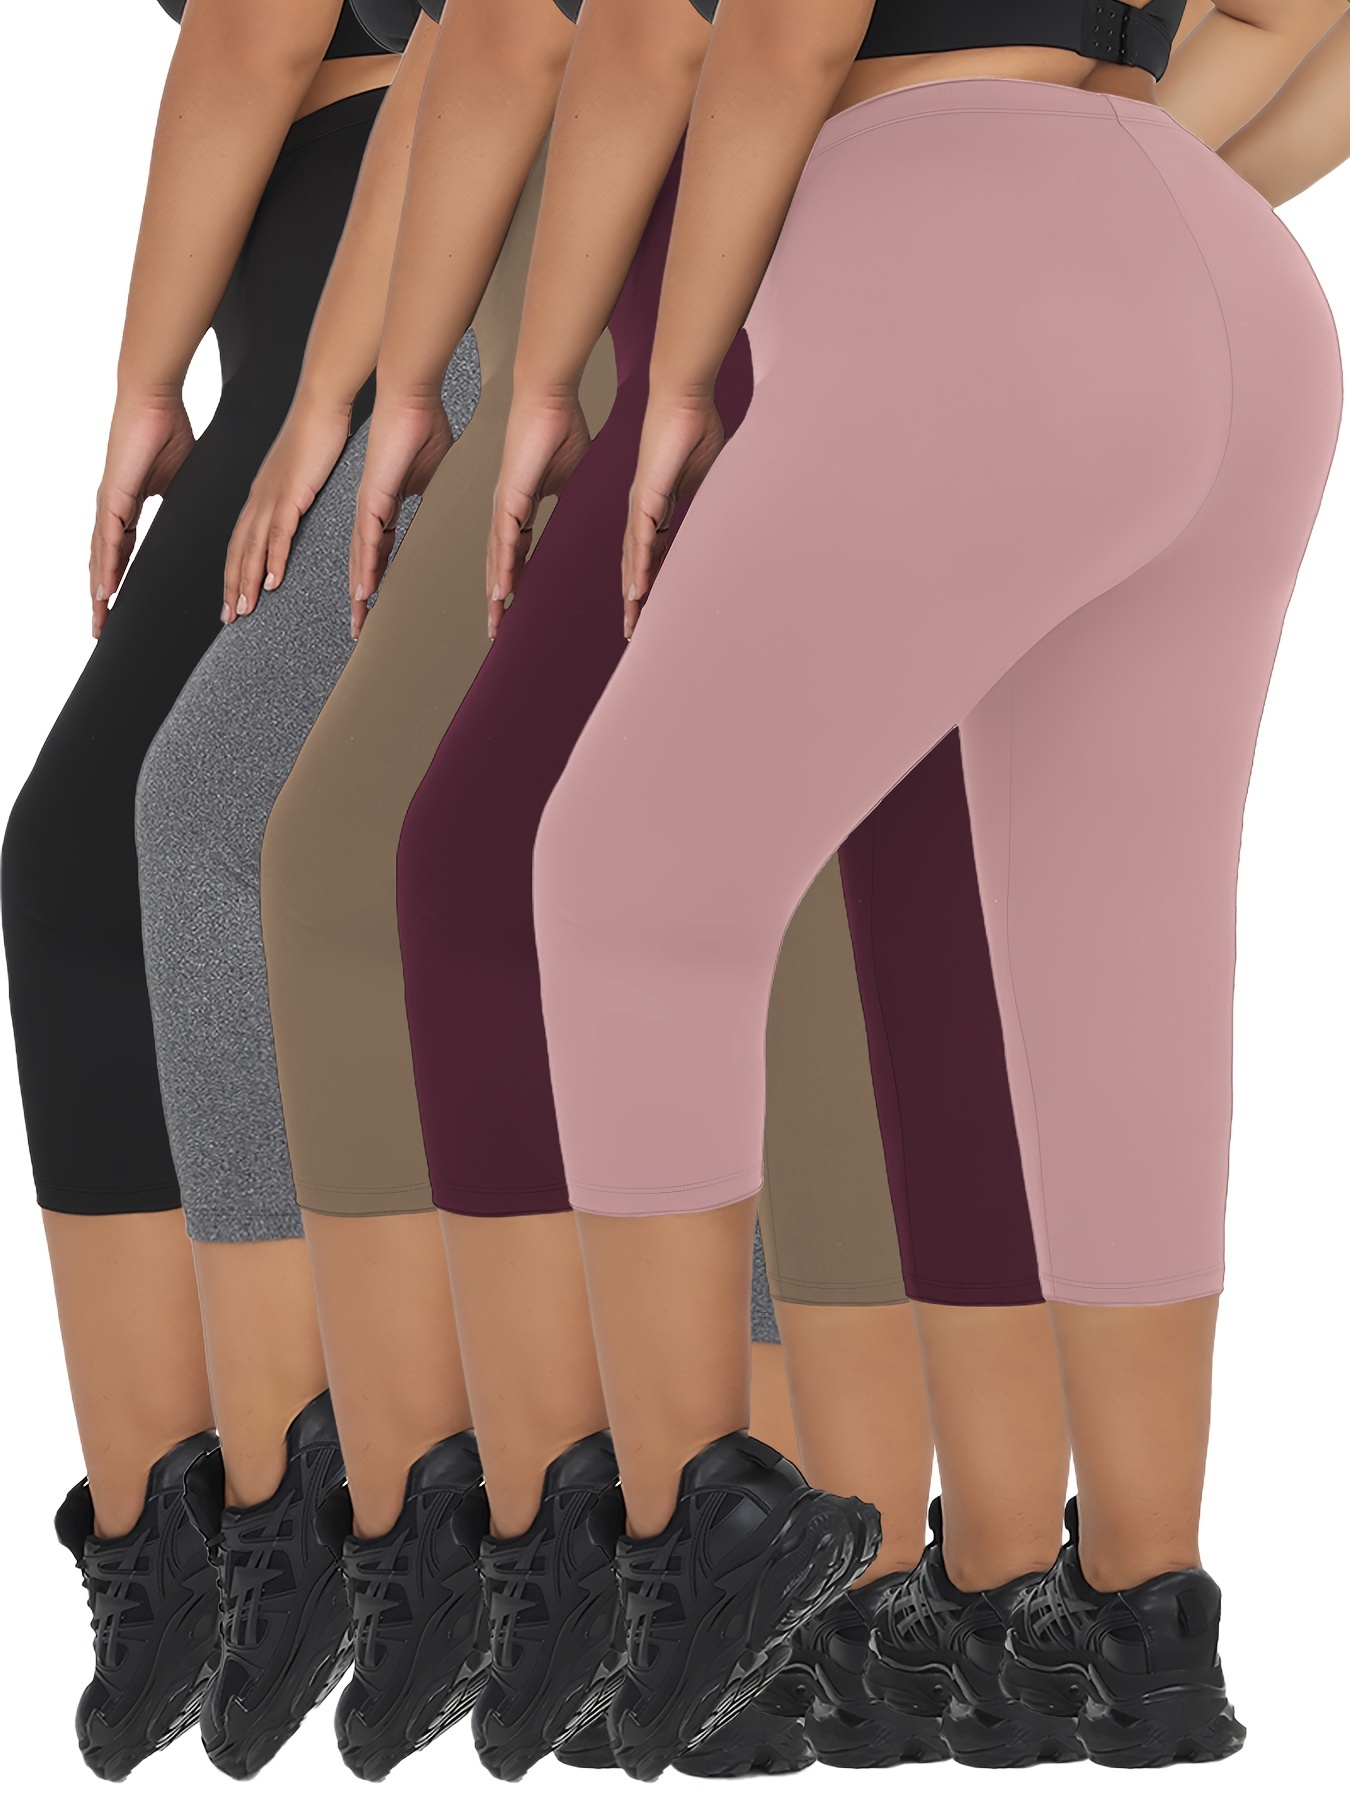 GREQ yoga pants with pockets for women plus size matching peach